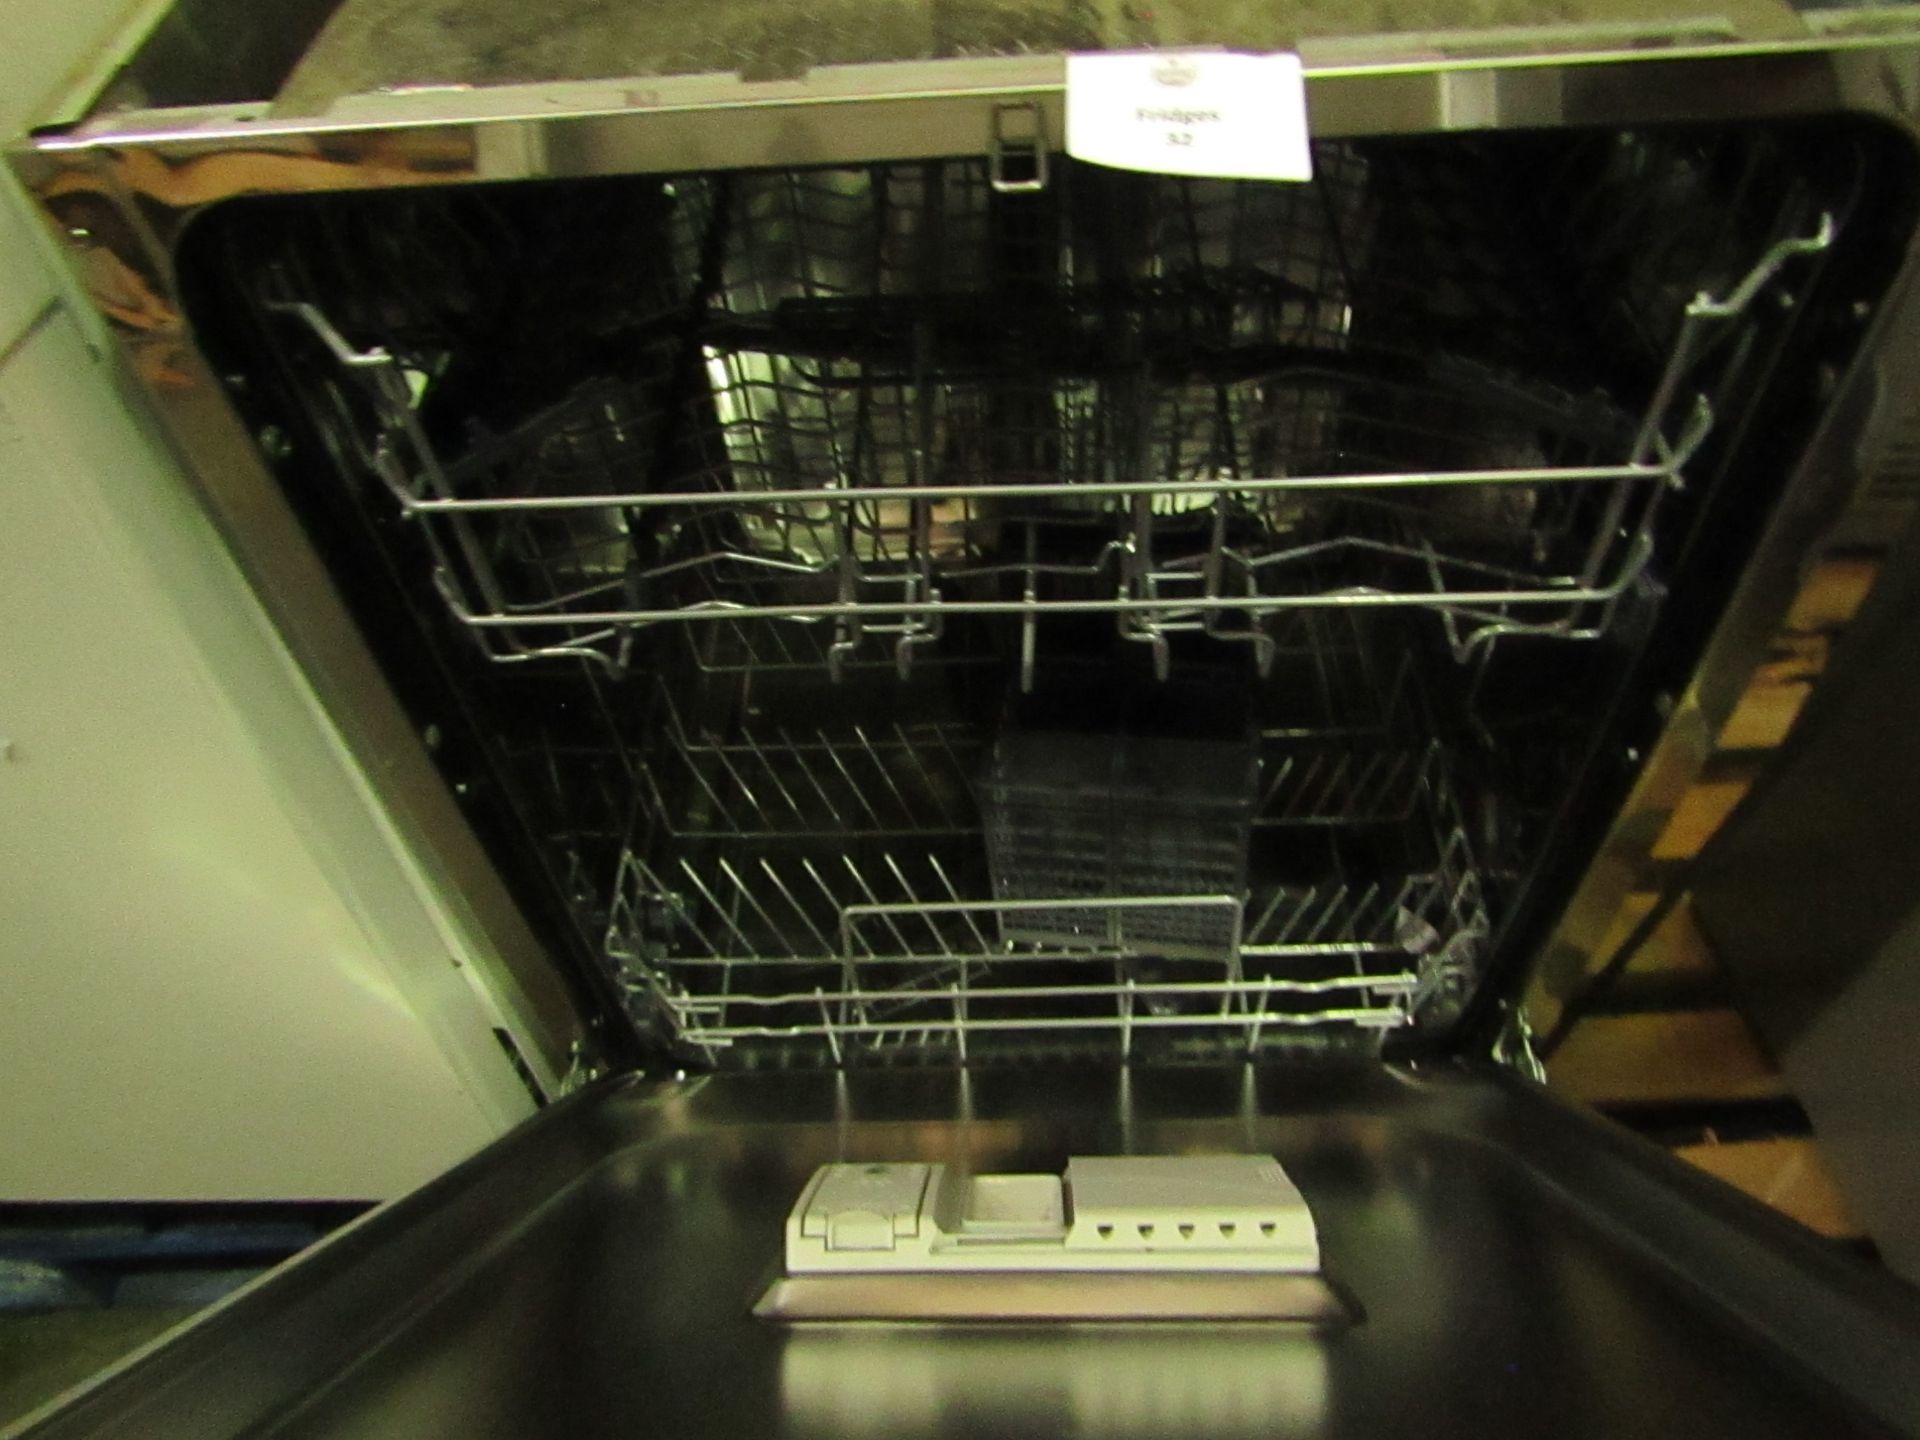 Baumatic integrated dishwasher powers on but we havent checked it any further - Image 2 of 2